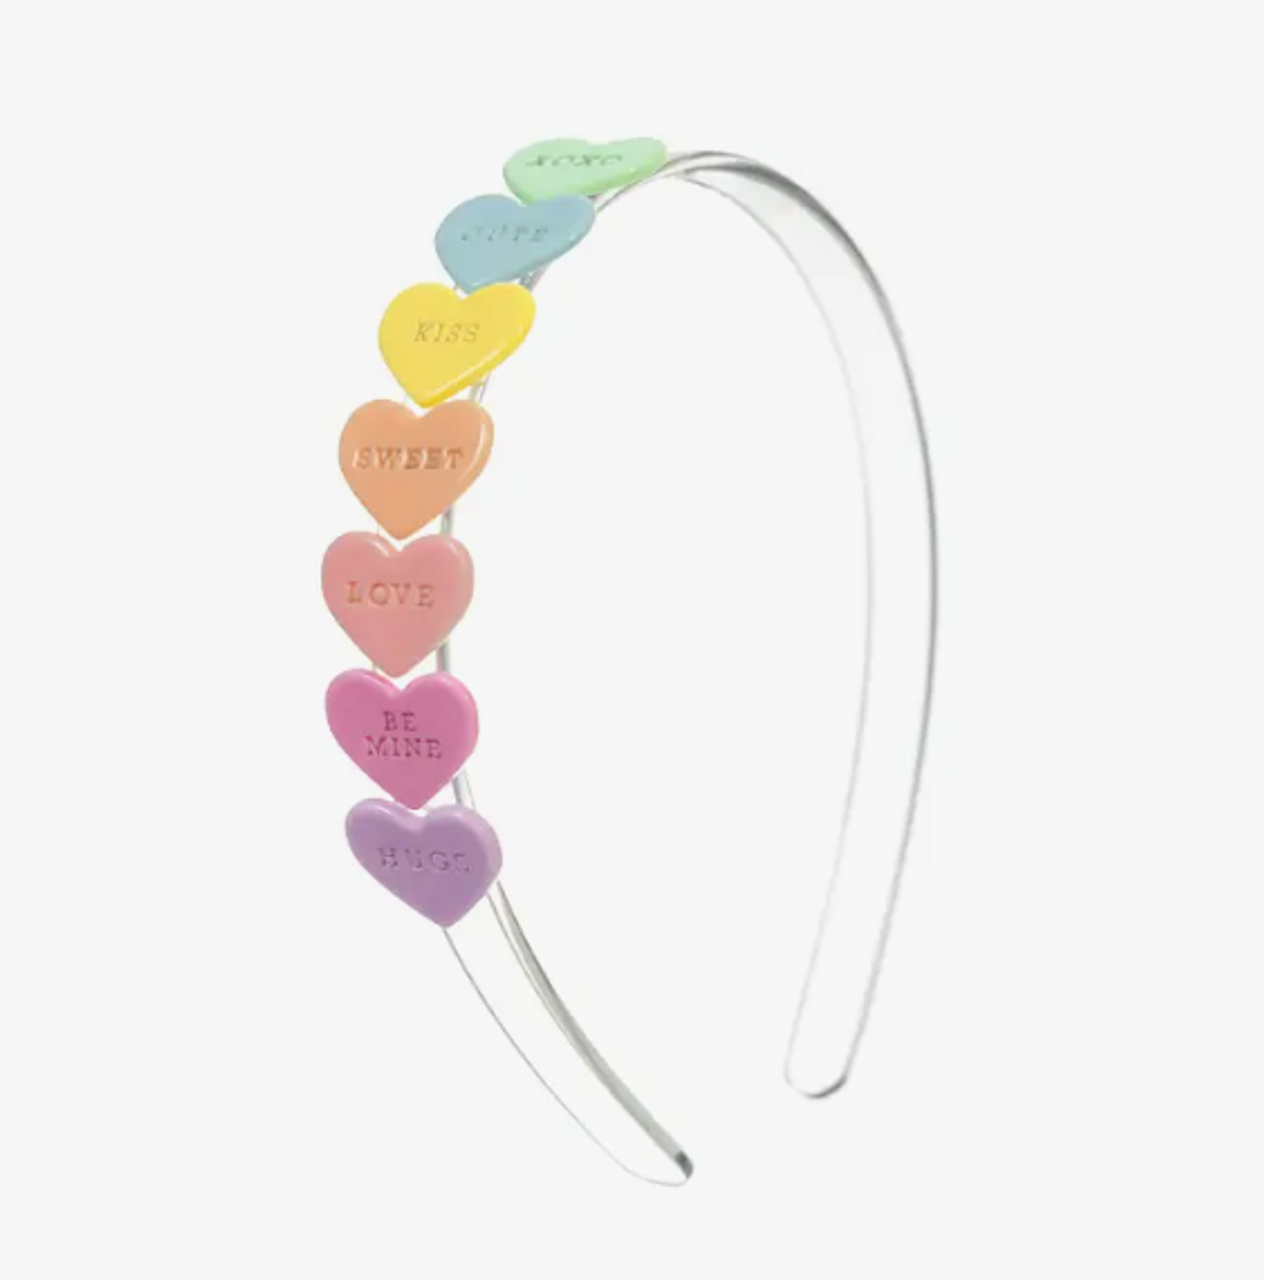 Lilies & Roses Centipede Candy Hearts Headband